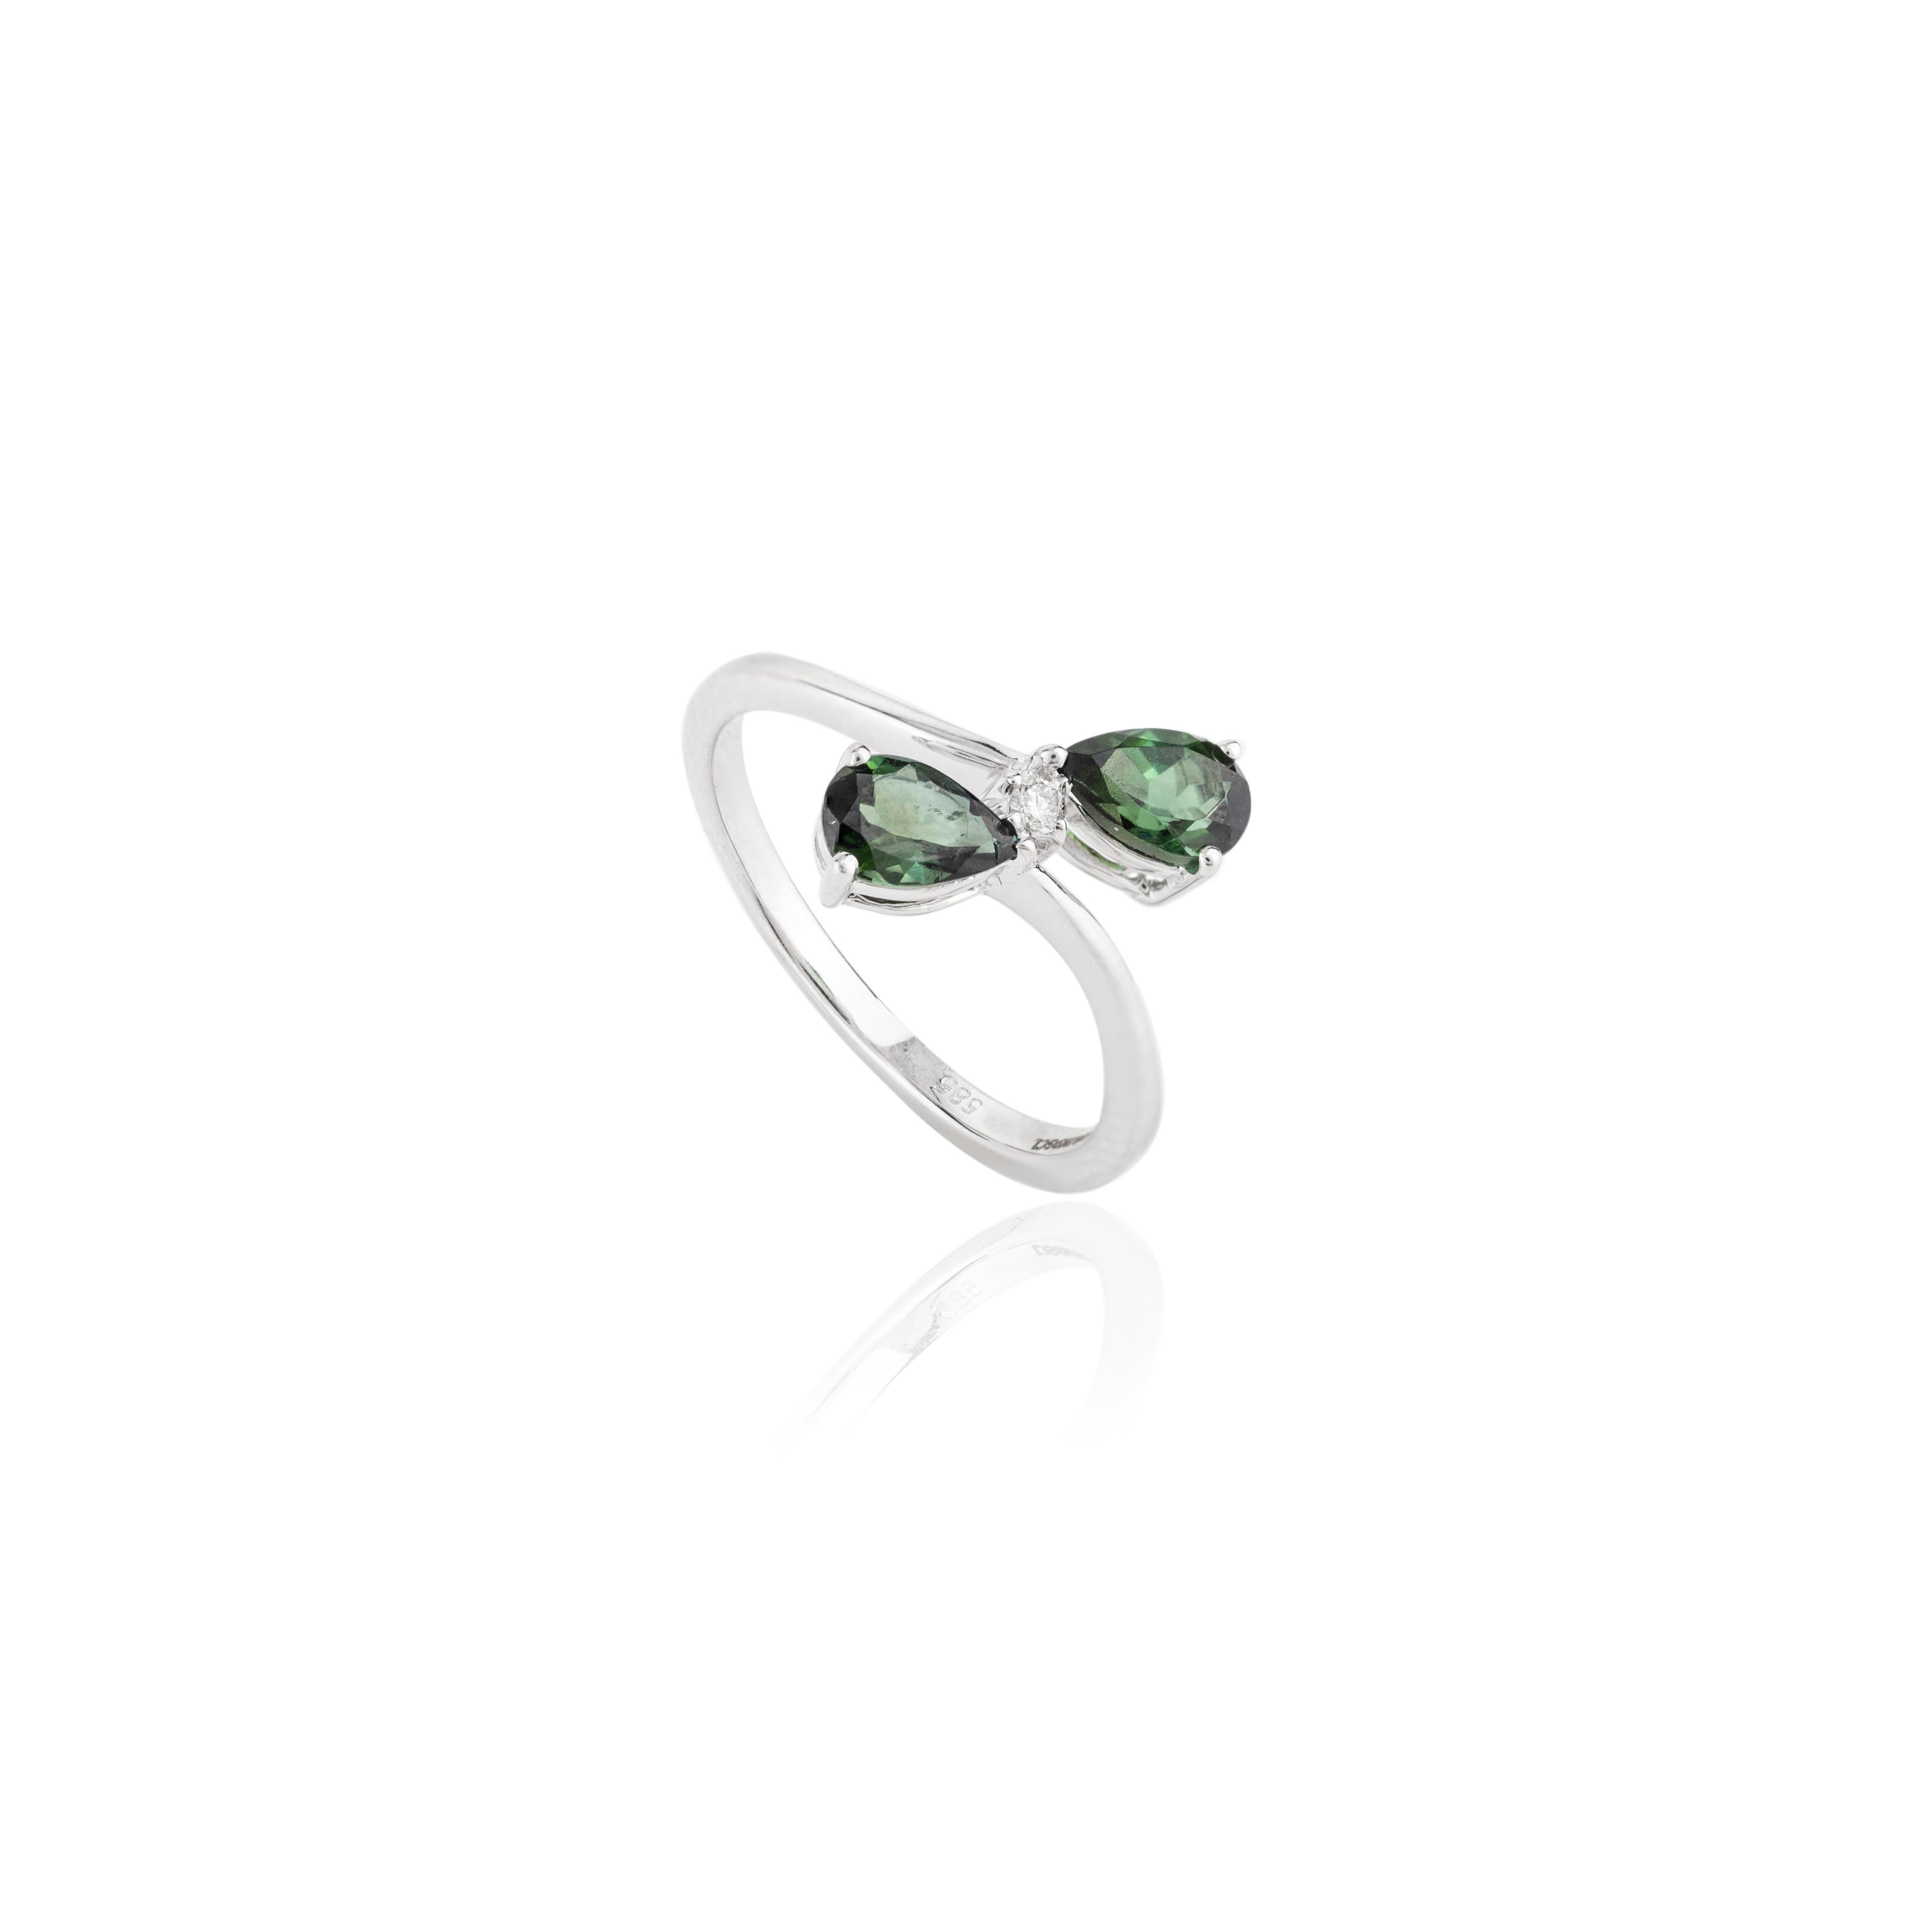 For Sale:  Natural Green Tourmaline Diamond Two Stone Ring in 14k White Gold 7